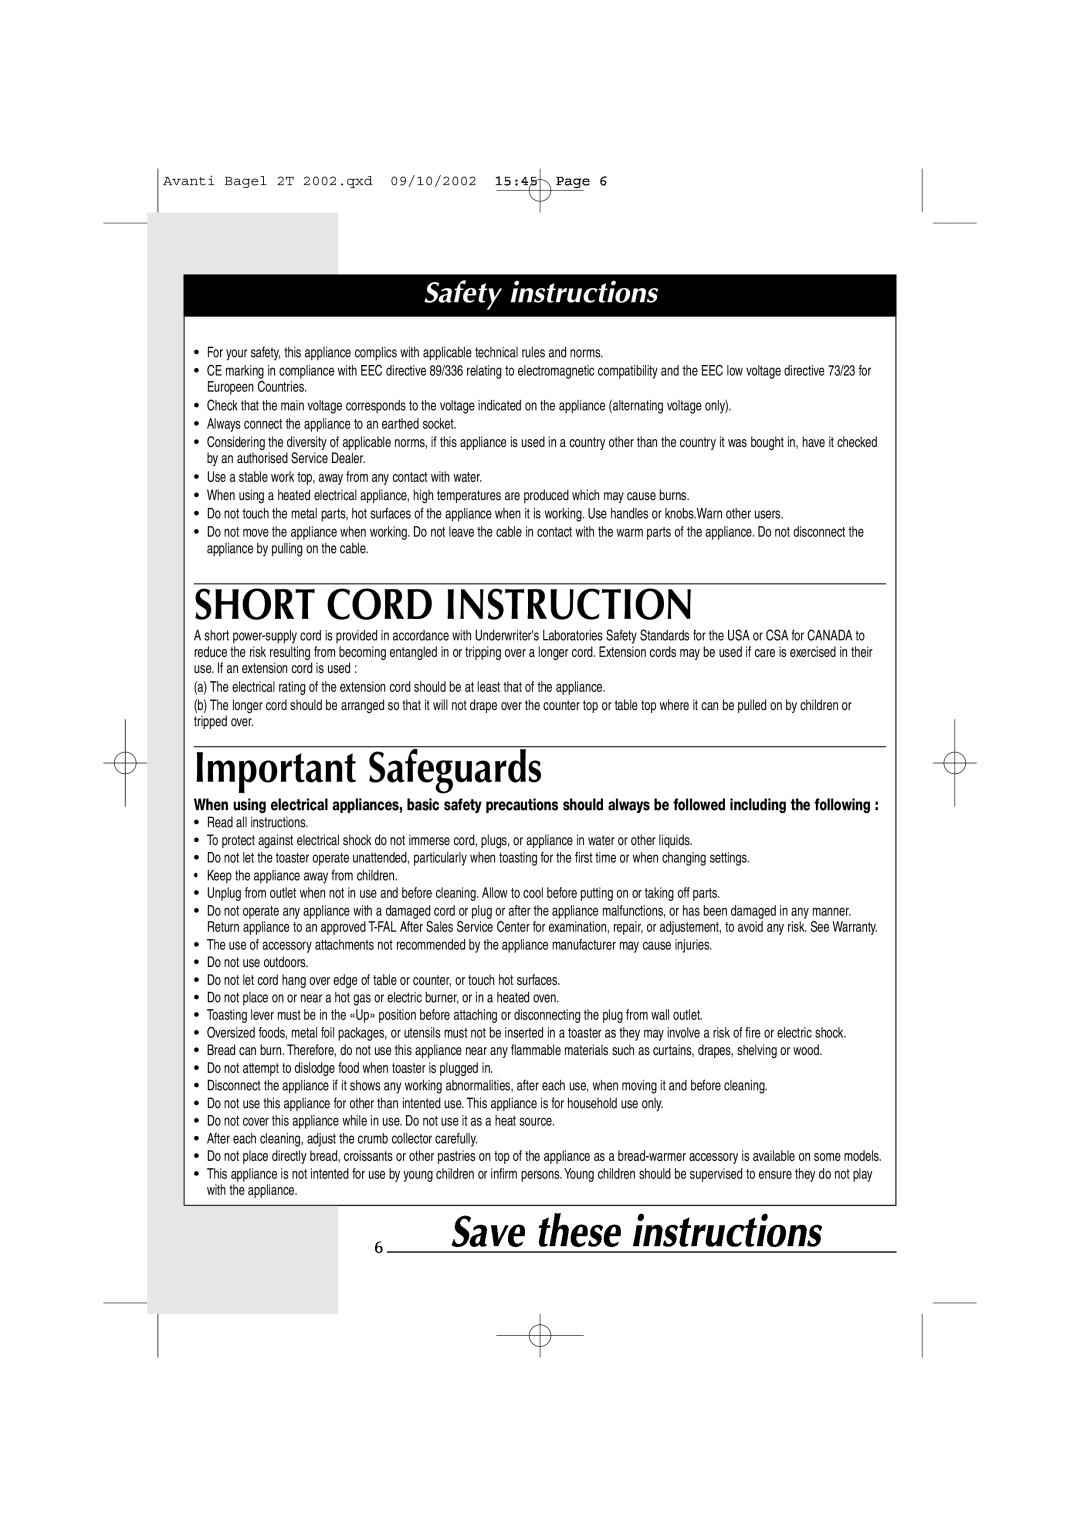 T-Fal Avante Deluxe Bagel Short Cord Instruction, Important Safeguards, 6Save these instructions, Safety instructions 